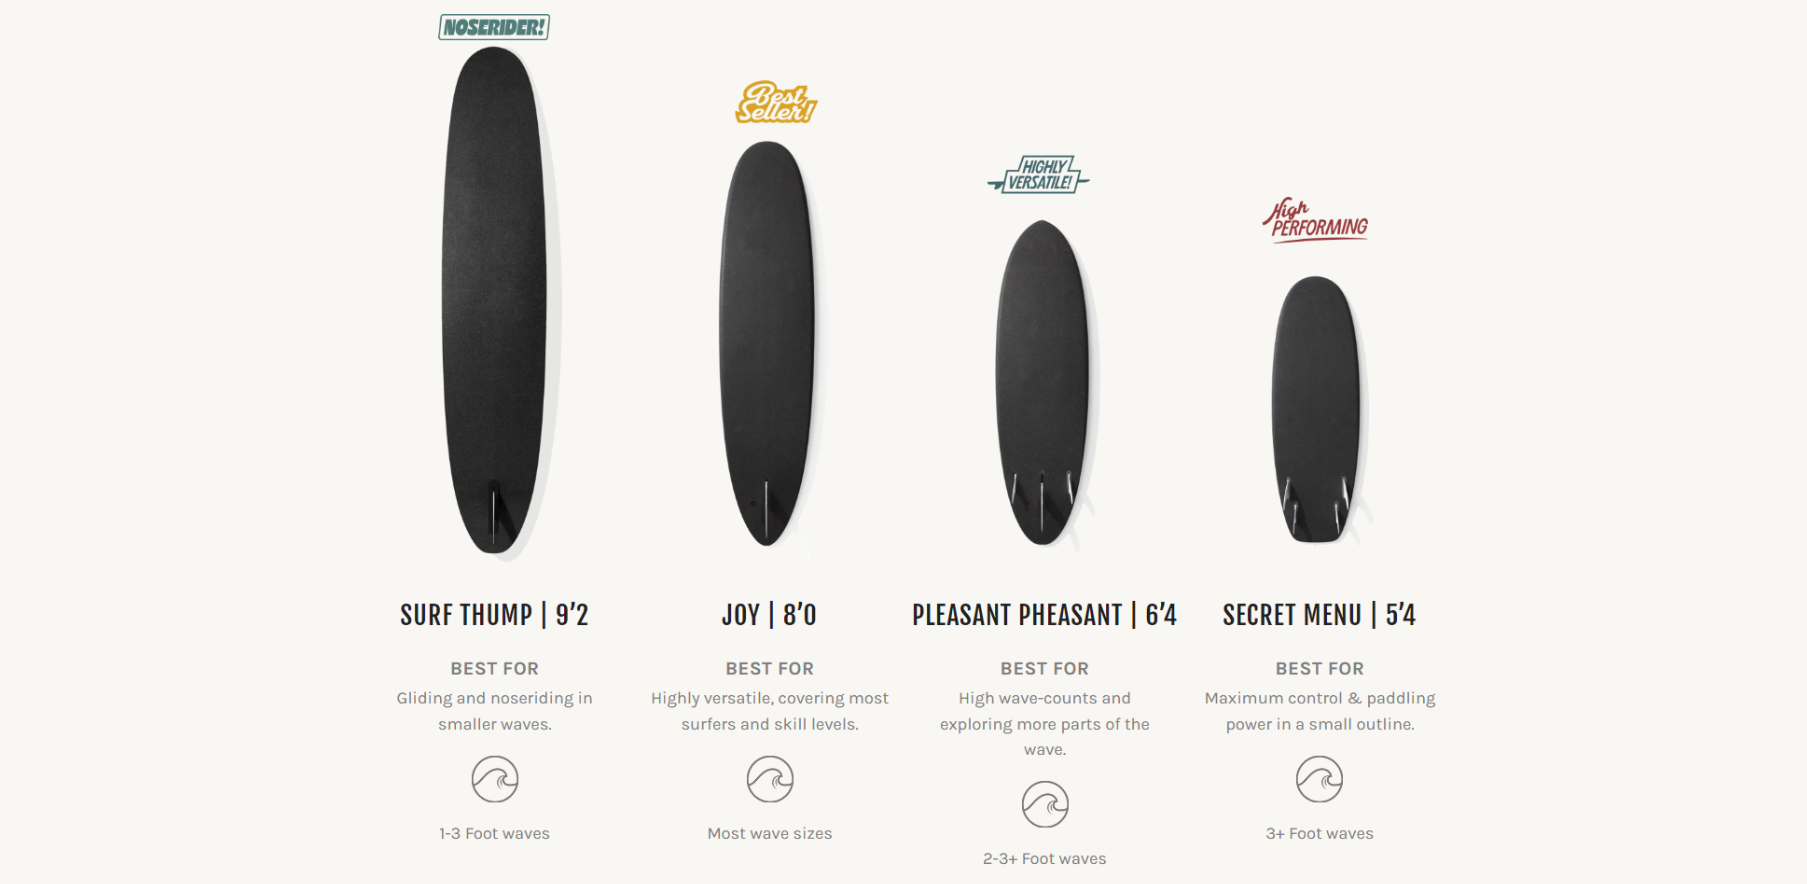 Almond Surfboards R-Series Recyclable Closed-Cell Foam Affordable and Durable Surfboards. Brief product descriptions with recommendations.